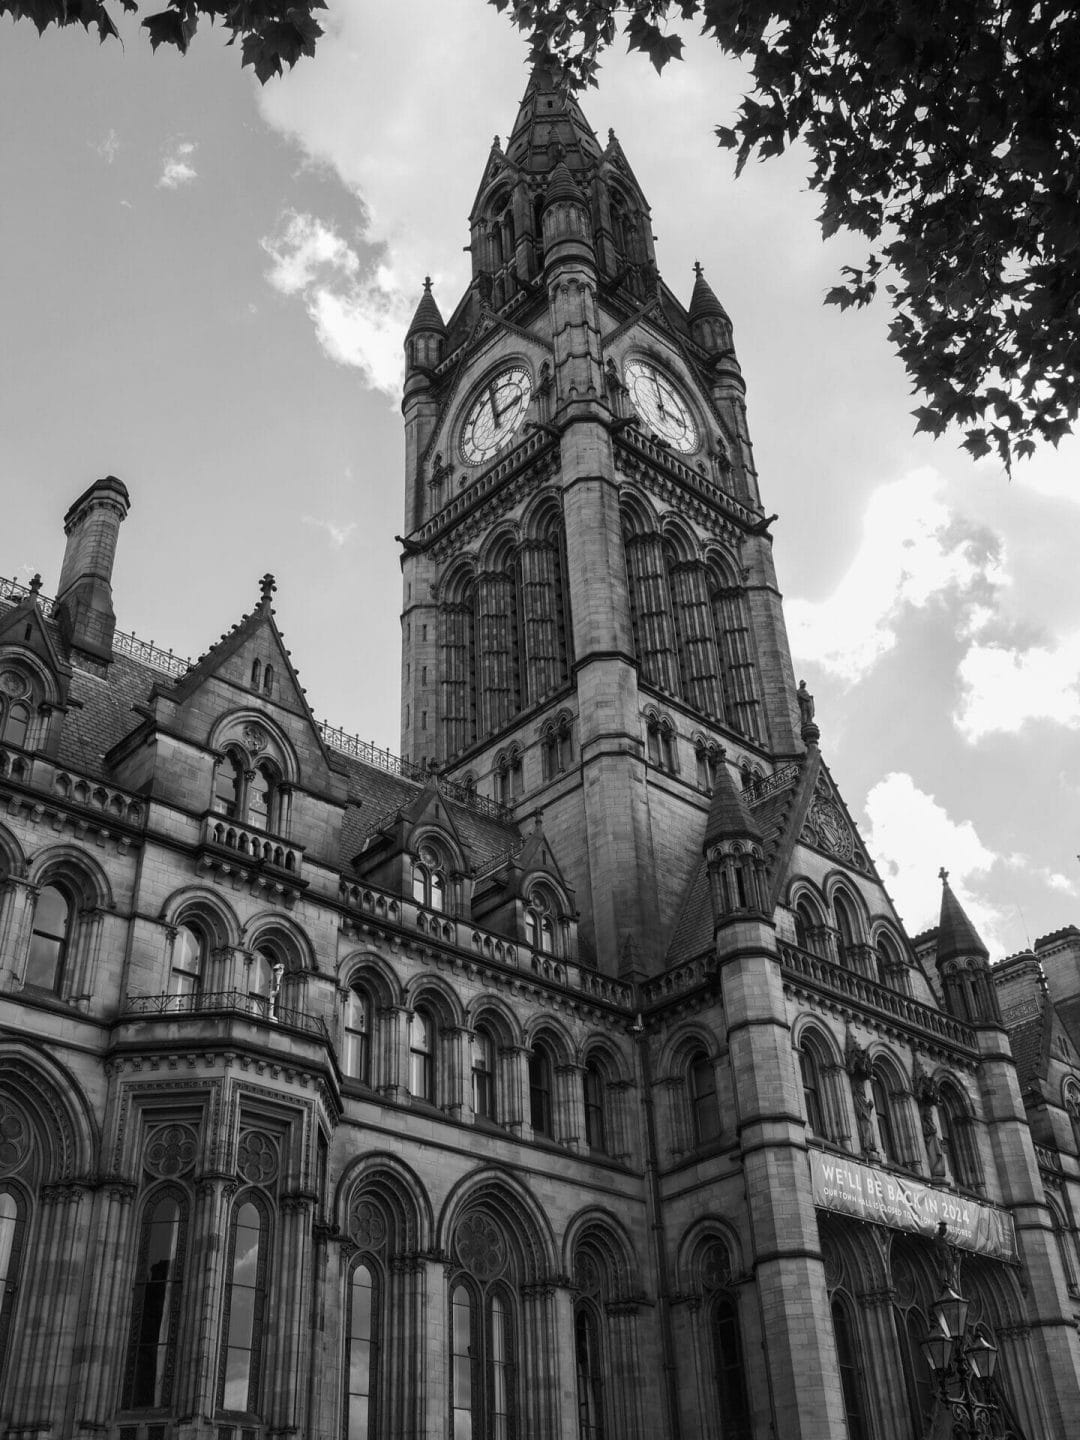 Black and White Photograph of an ornate building - WelshotRewards Day - Architectural Photography in Manchester